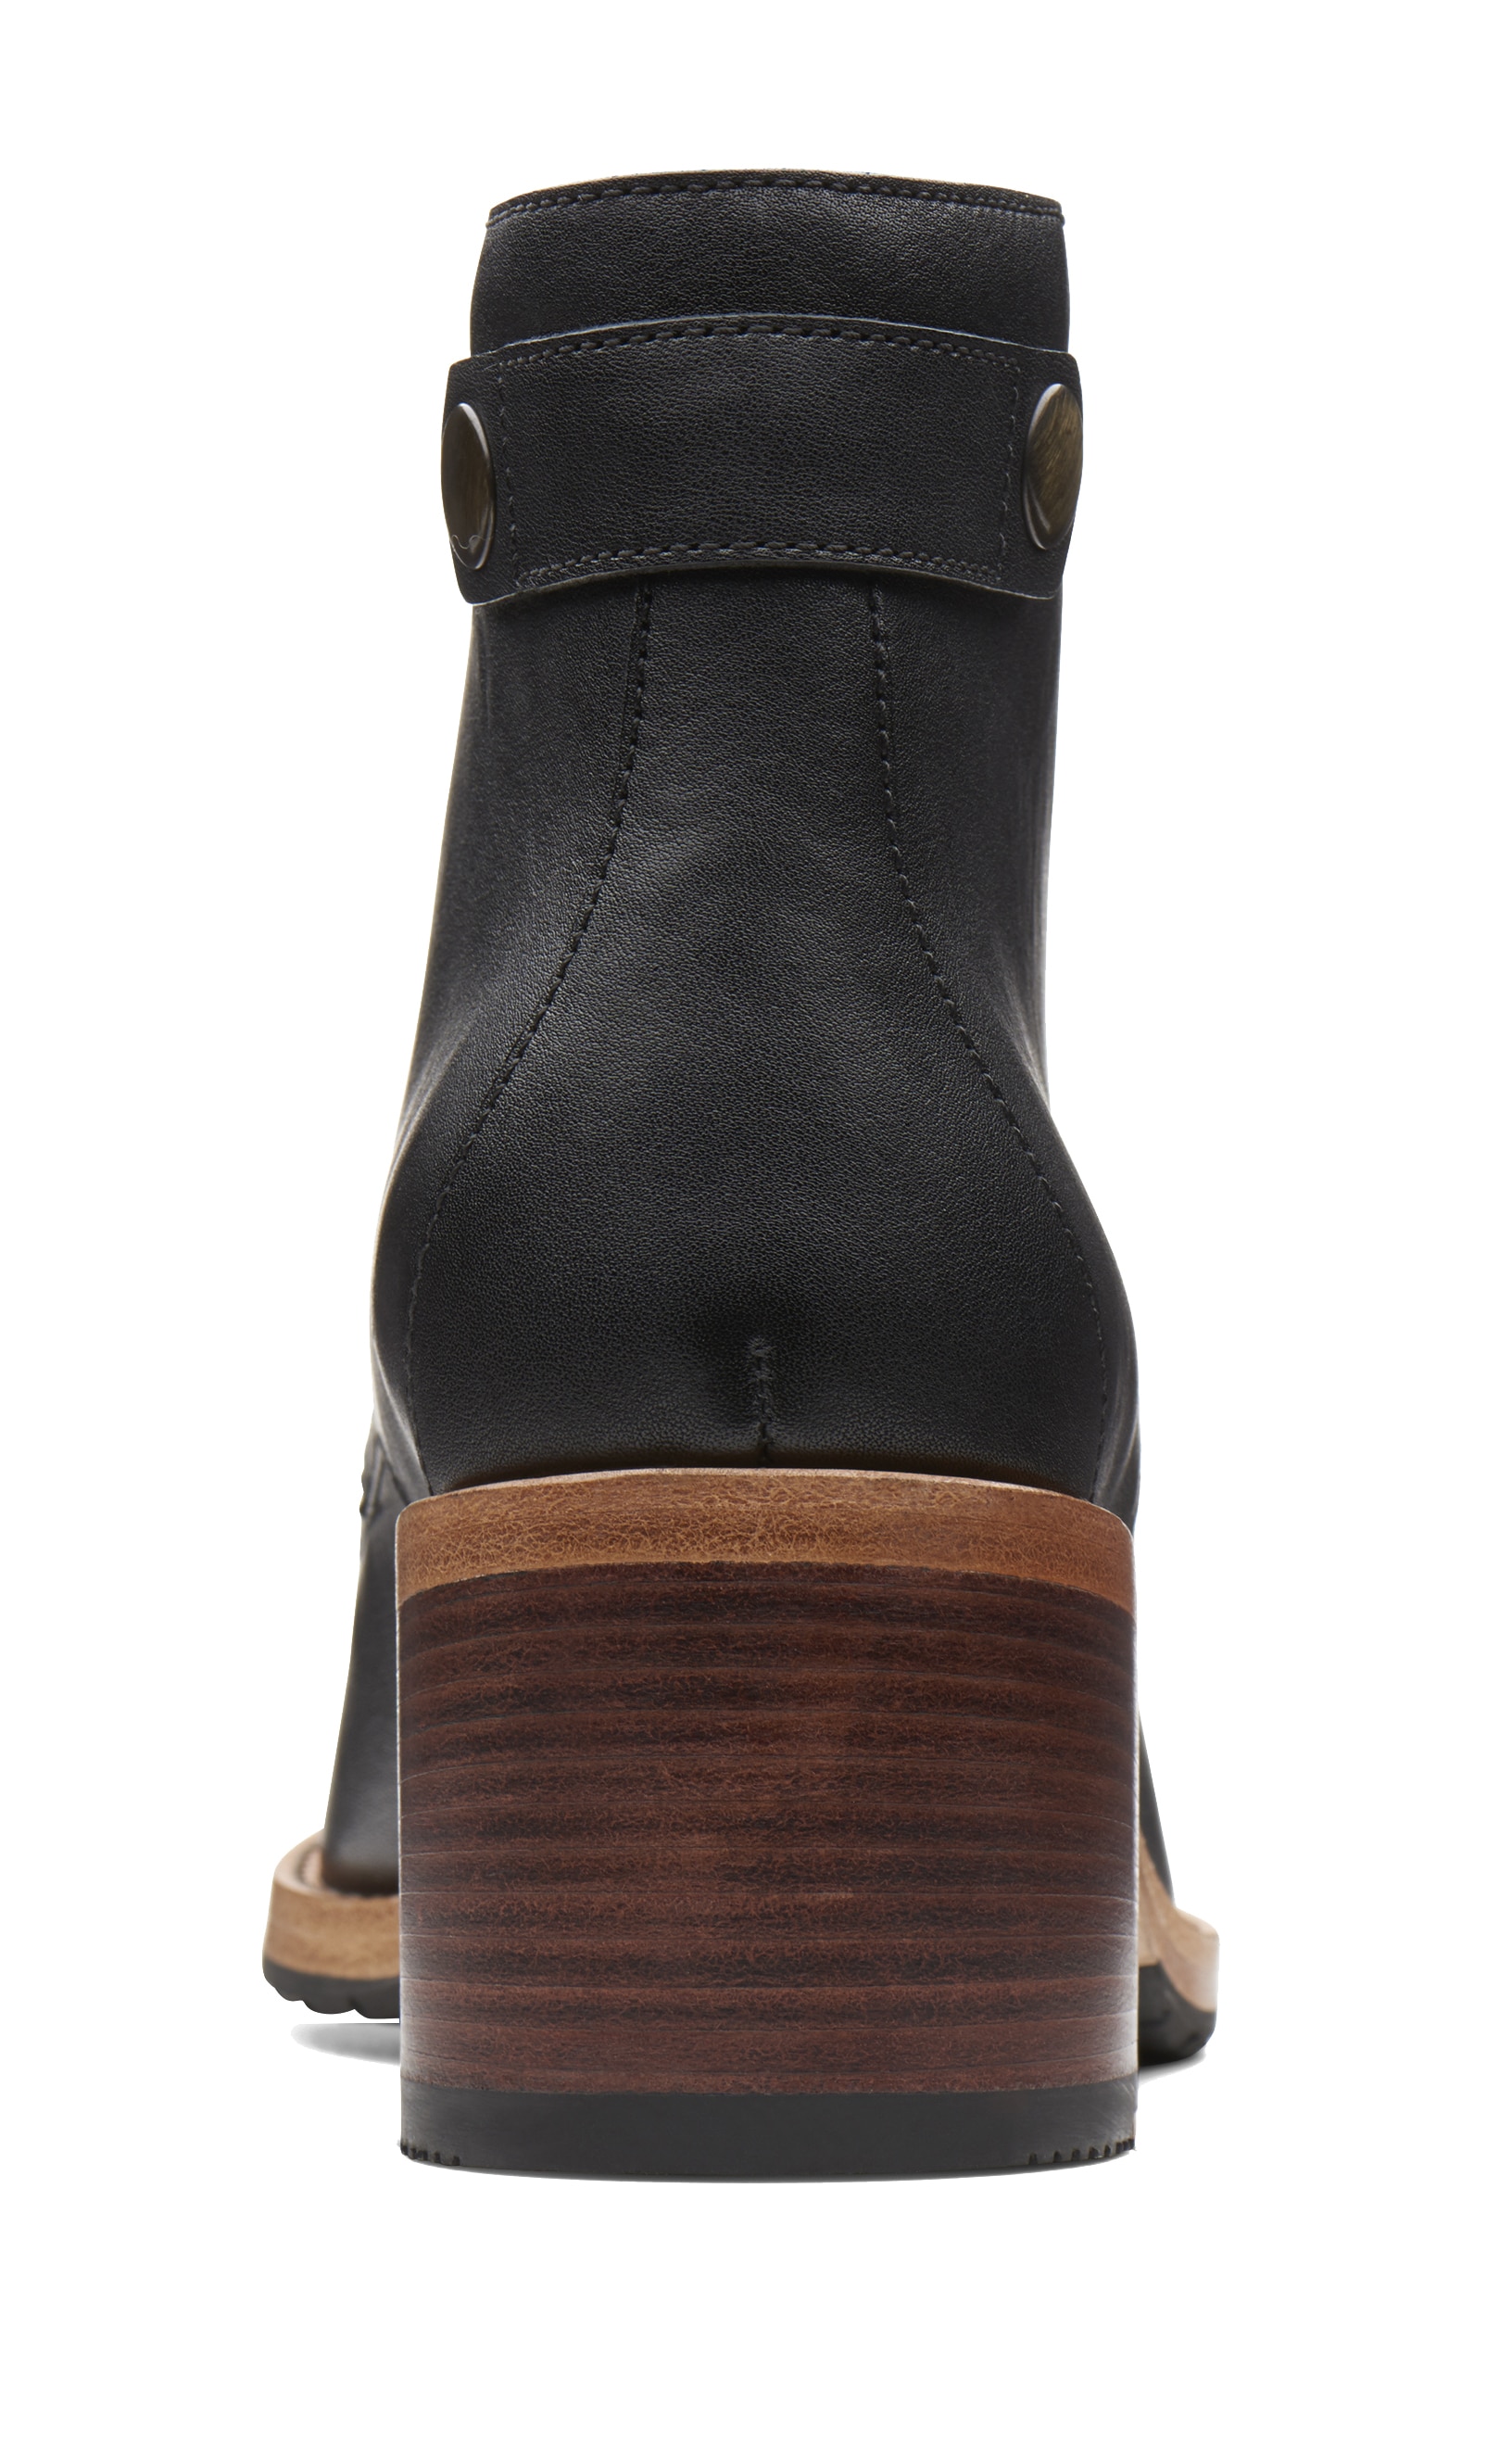 clarkdale tone boots